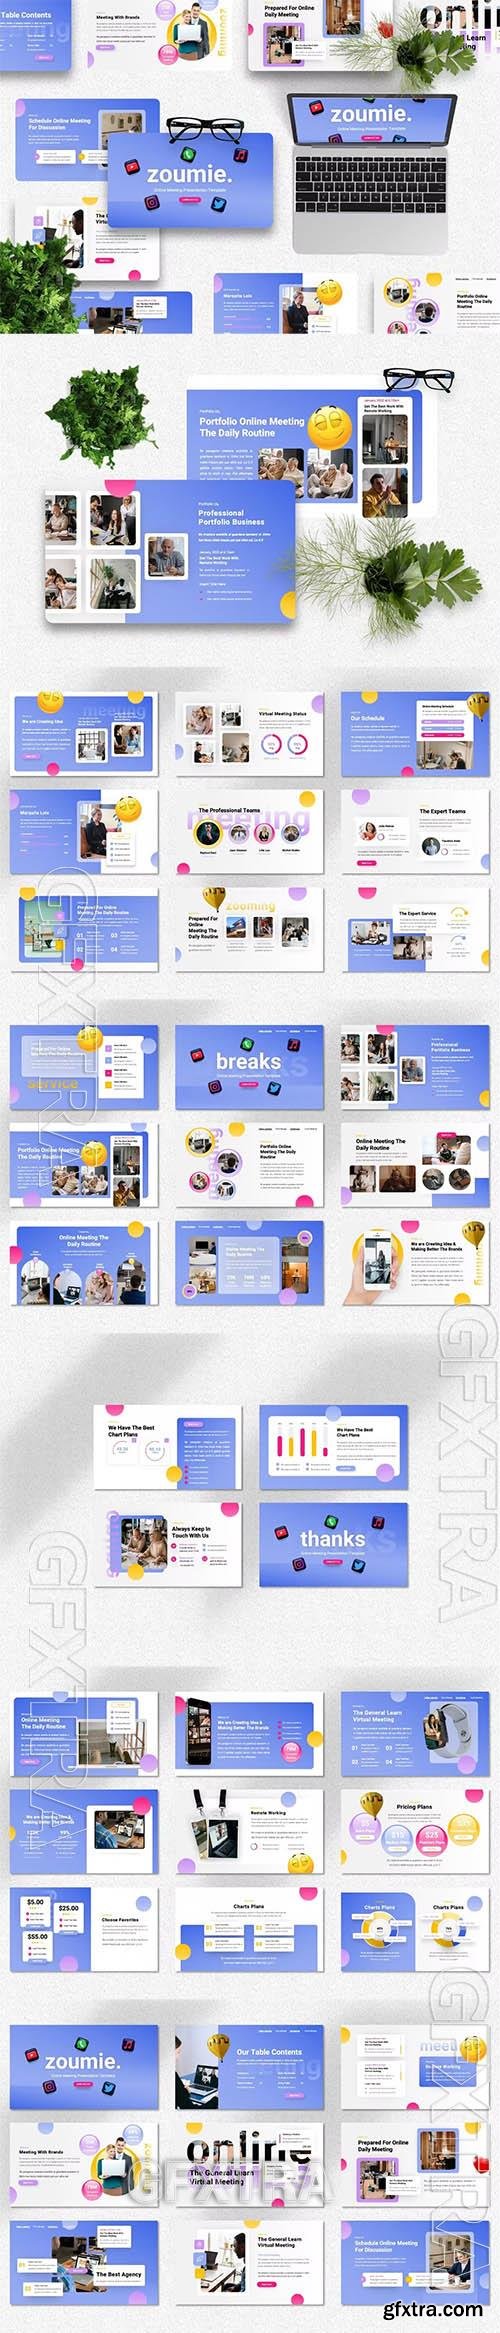 Zoumie - Online Meeting Powerpoint, Keynote and Google Slides Presentation Templates 